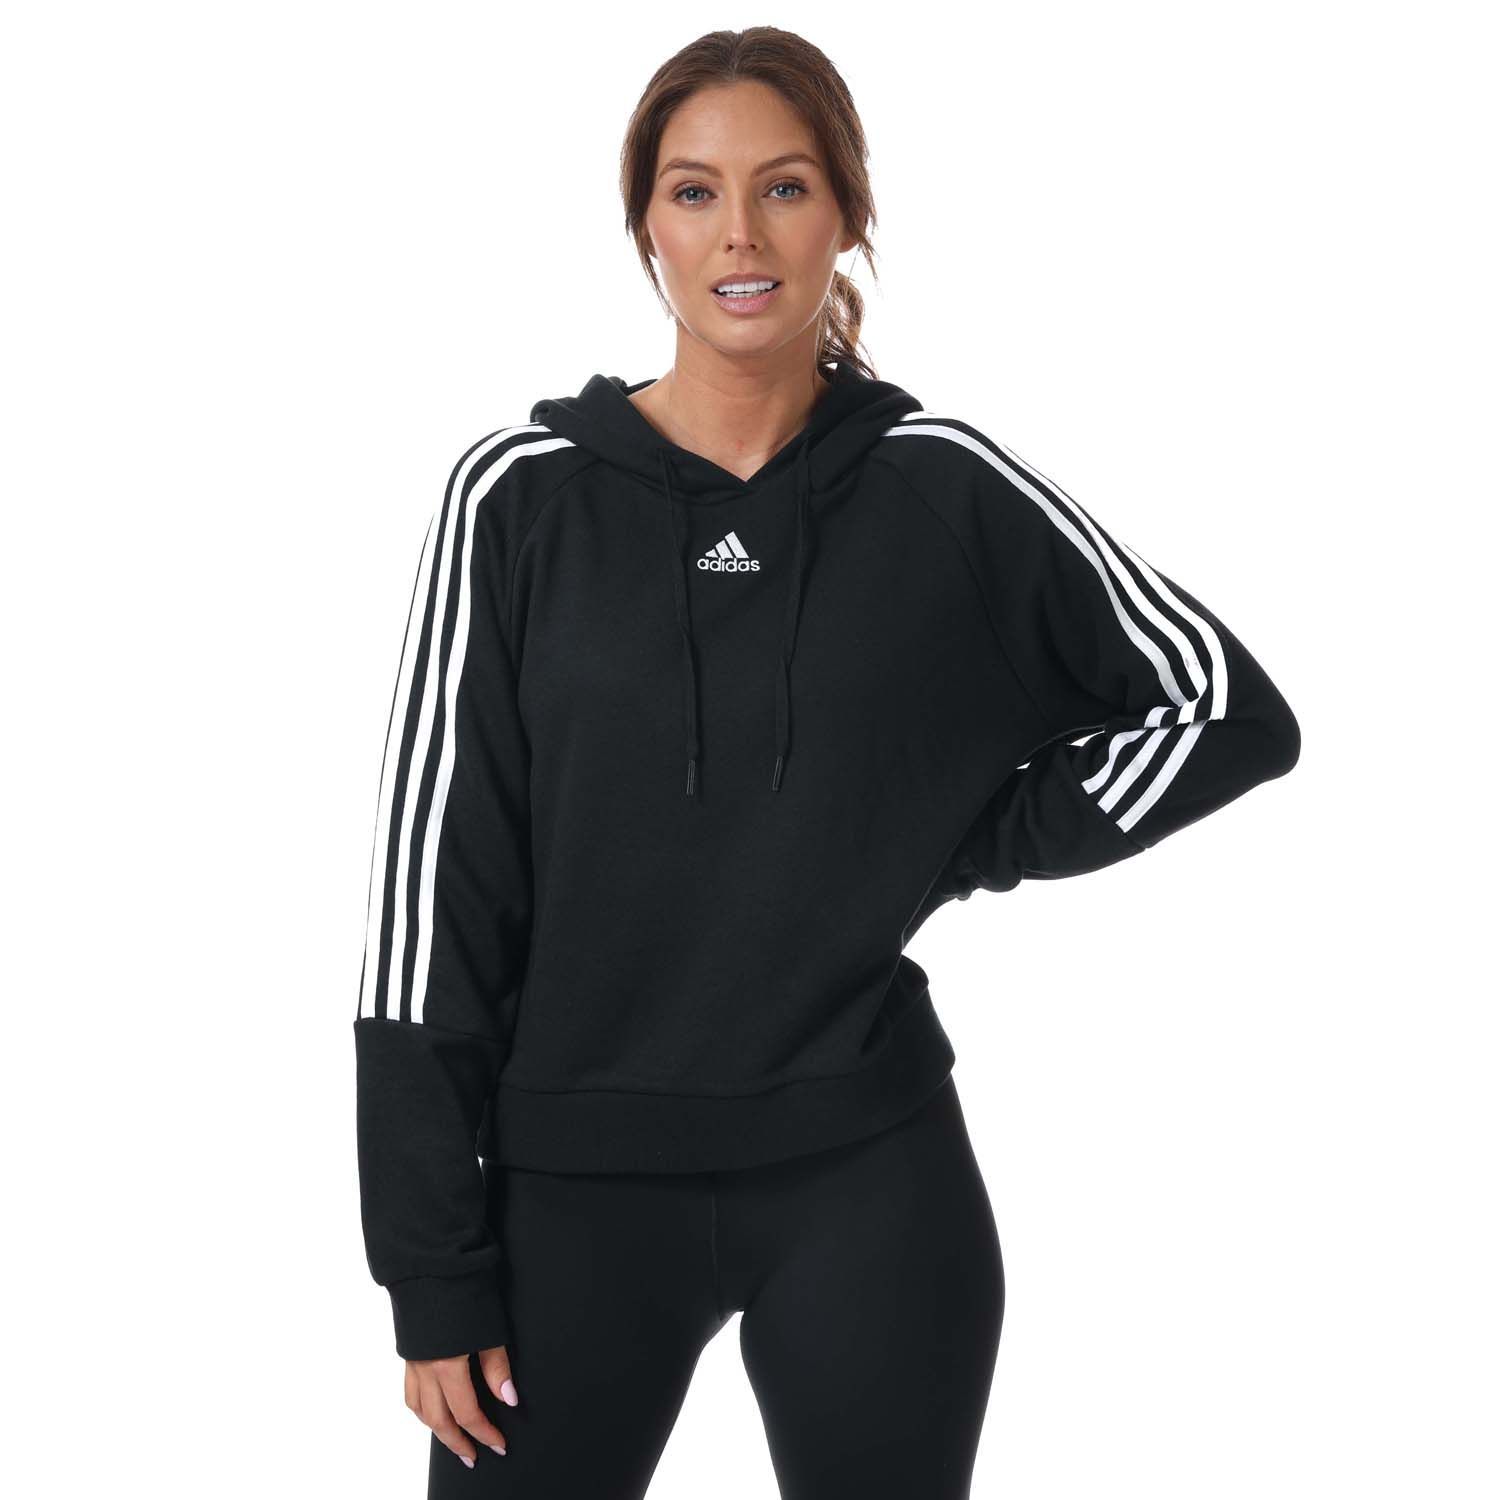 Womens adidas Essentials 3- Stripes Cropped Hoody in black.- Drawcord-adjustable hood.- Long sleeves.- Ribbed cuffs.- 3-Stripes down both arms.- adidas Badge of Sport logo on the chest.- Relaxed fit.- Main Material: 53% Cotton  36% Polyester (Recycled)  11% Rayon. Hood Lining: 100% Cotton. - Ref:GL1460